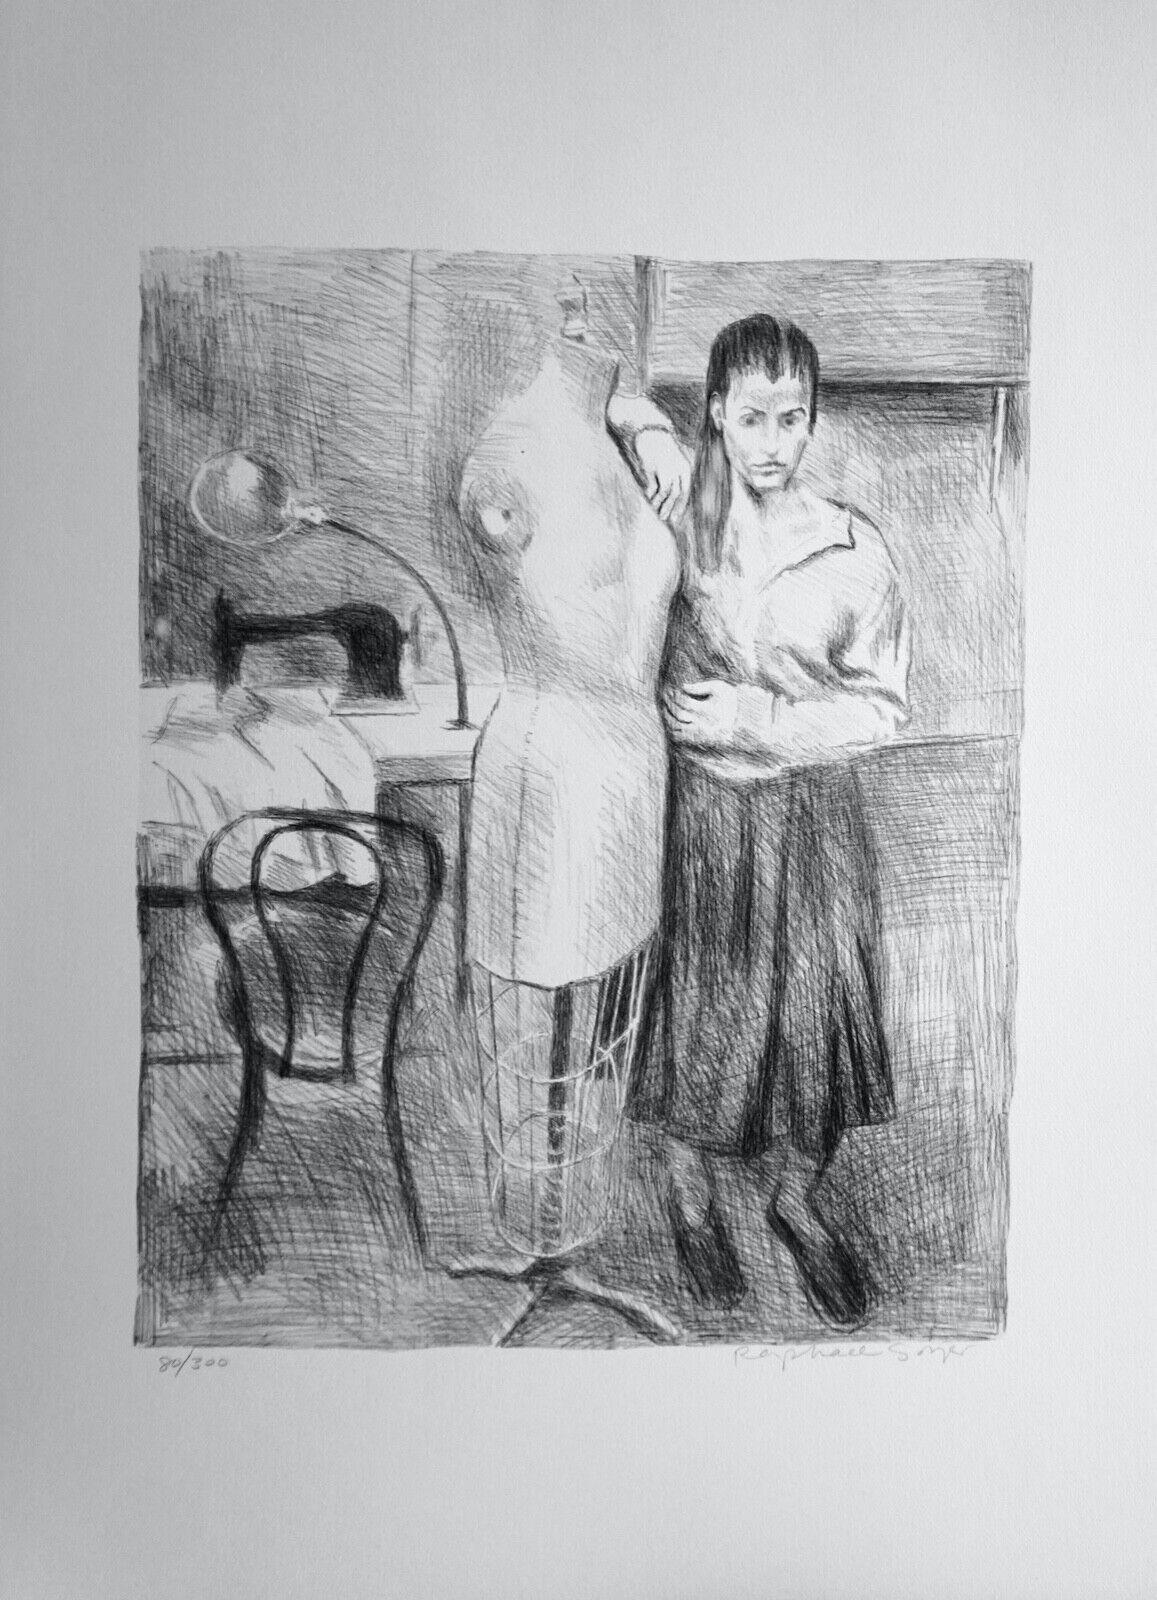 Artist: Raphael Soyer
Title: Seamstress 1 Portfolio
Medium: 2 Lithographs, 1 printed in color & 1 black/white
Original paper portfolio cover 
Signed: Hand Signed
Edition: From the edition of 300
Measurements: 21 1/2